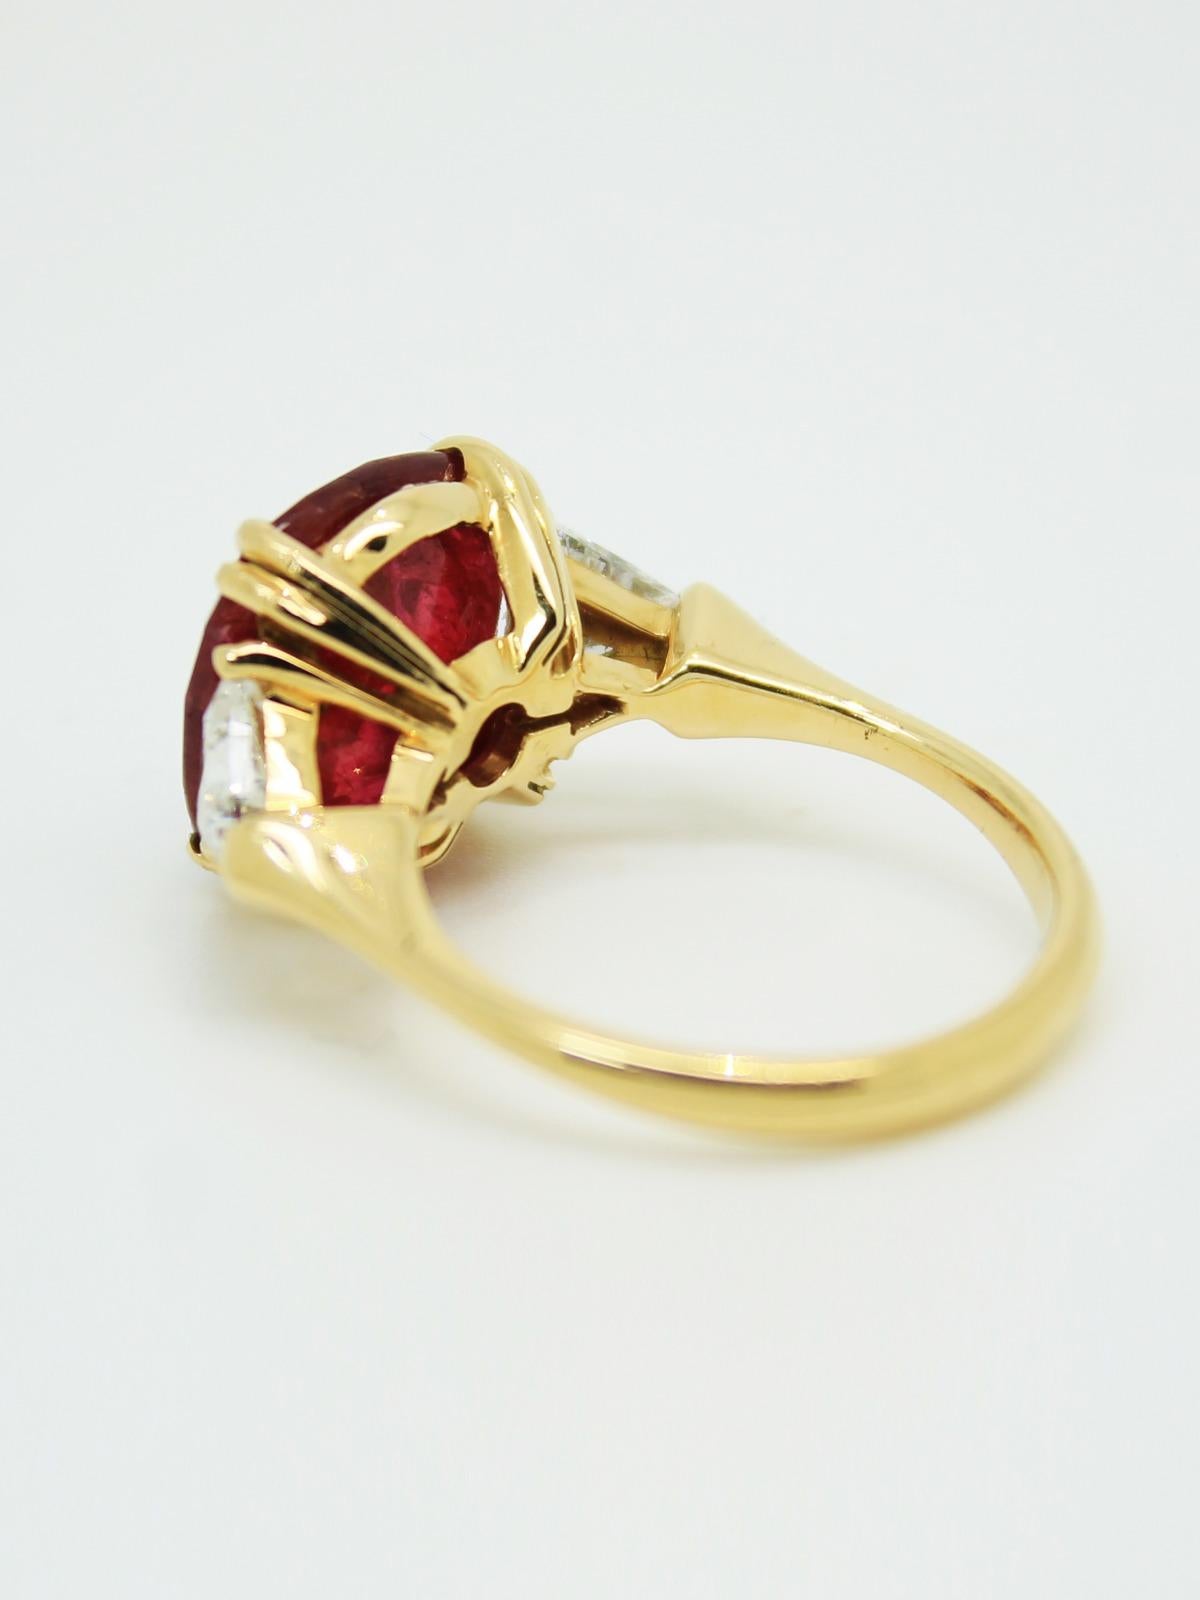 Cushion Cut Bespoke 7 Carat Red Ruby Certified Natural No Heat Ruby Diamond Cushion Ring For Sale